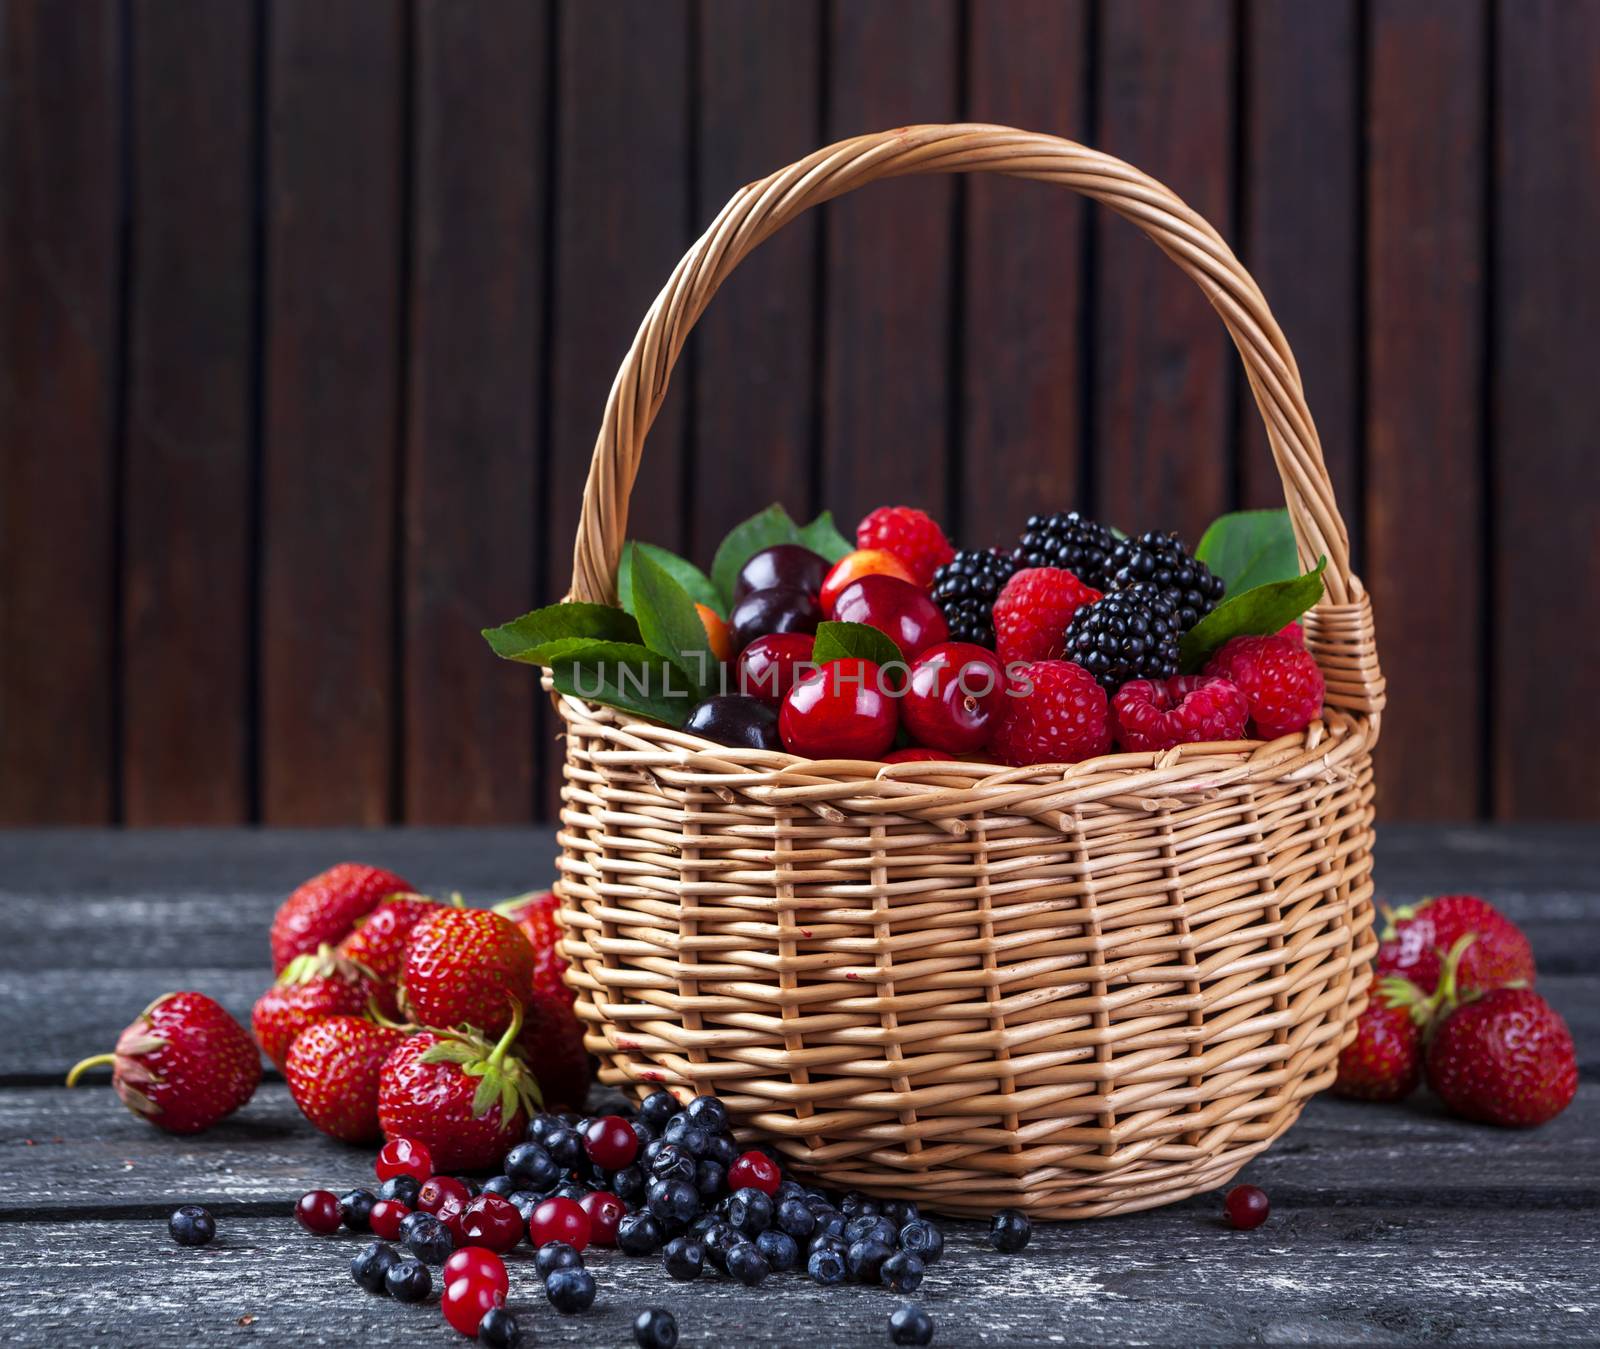 Berries mix in basket on rustic wooden background by xamtiw